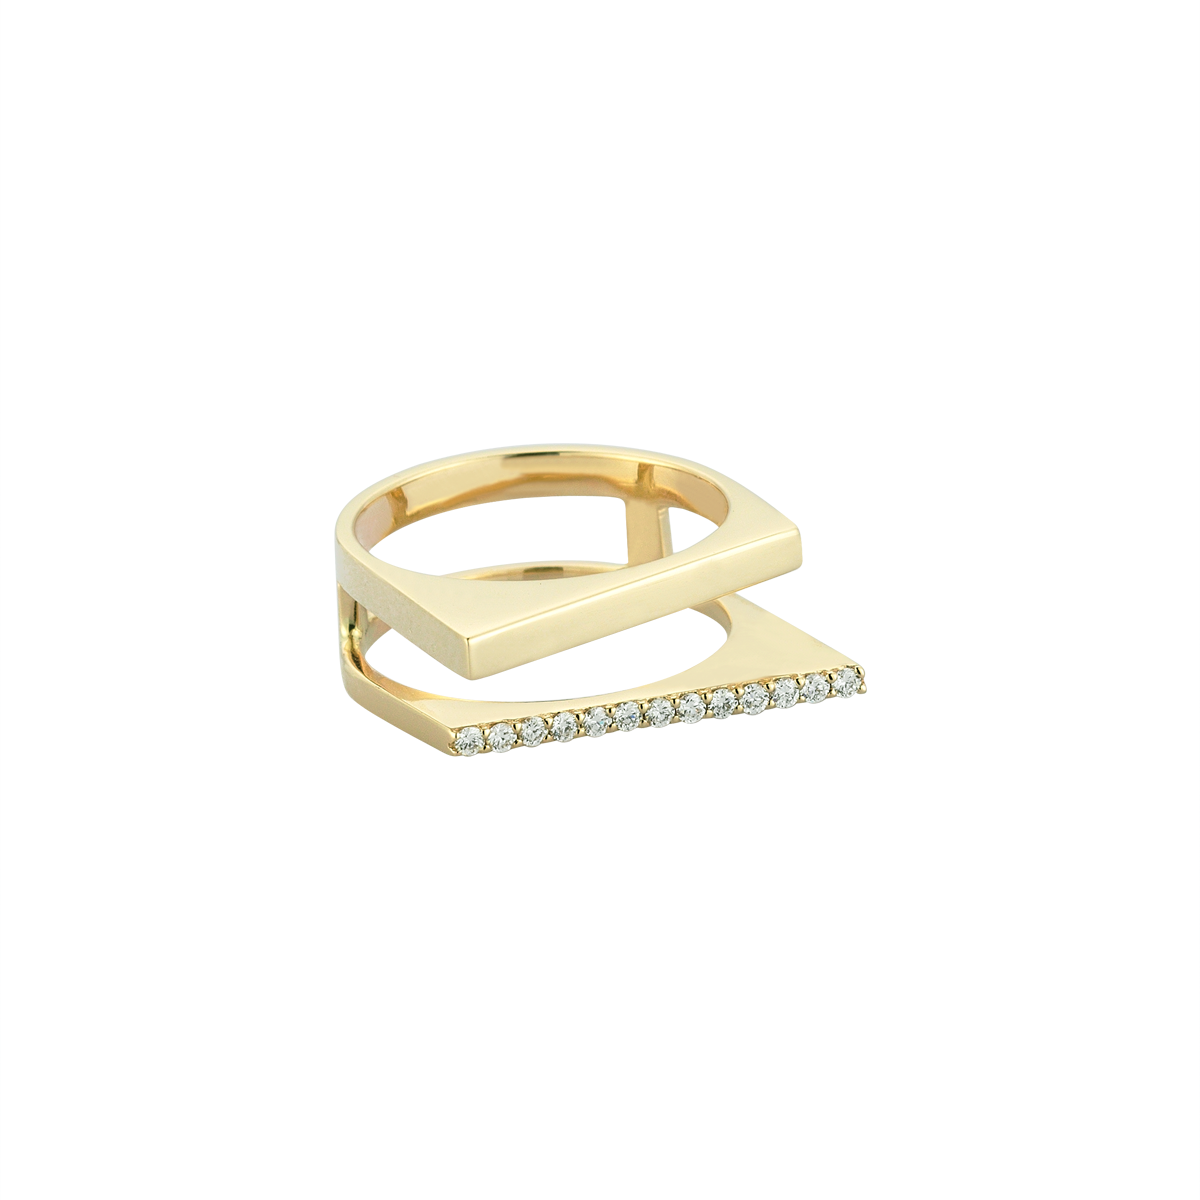 Angled Diamond Double Ring in Yellow Gold - Her Story Shop